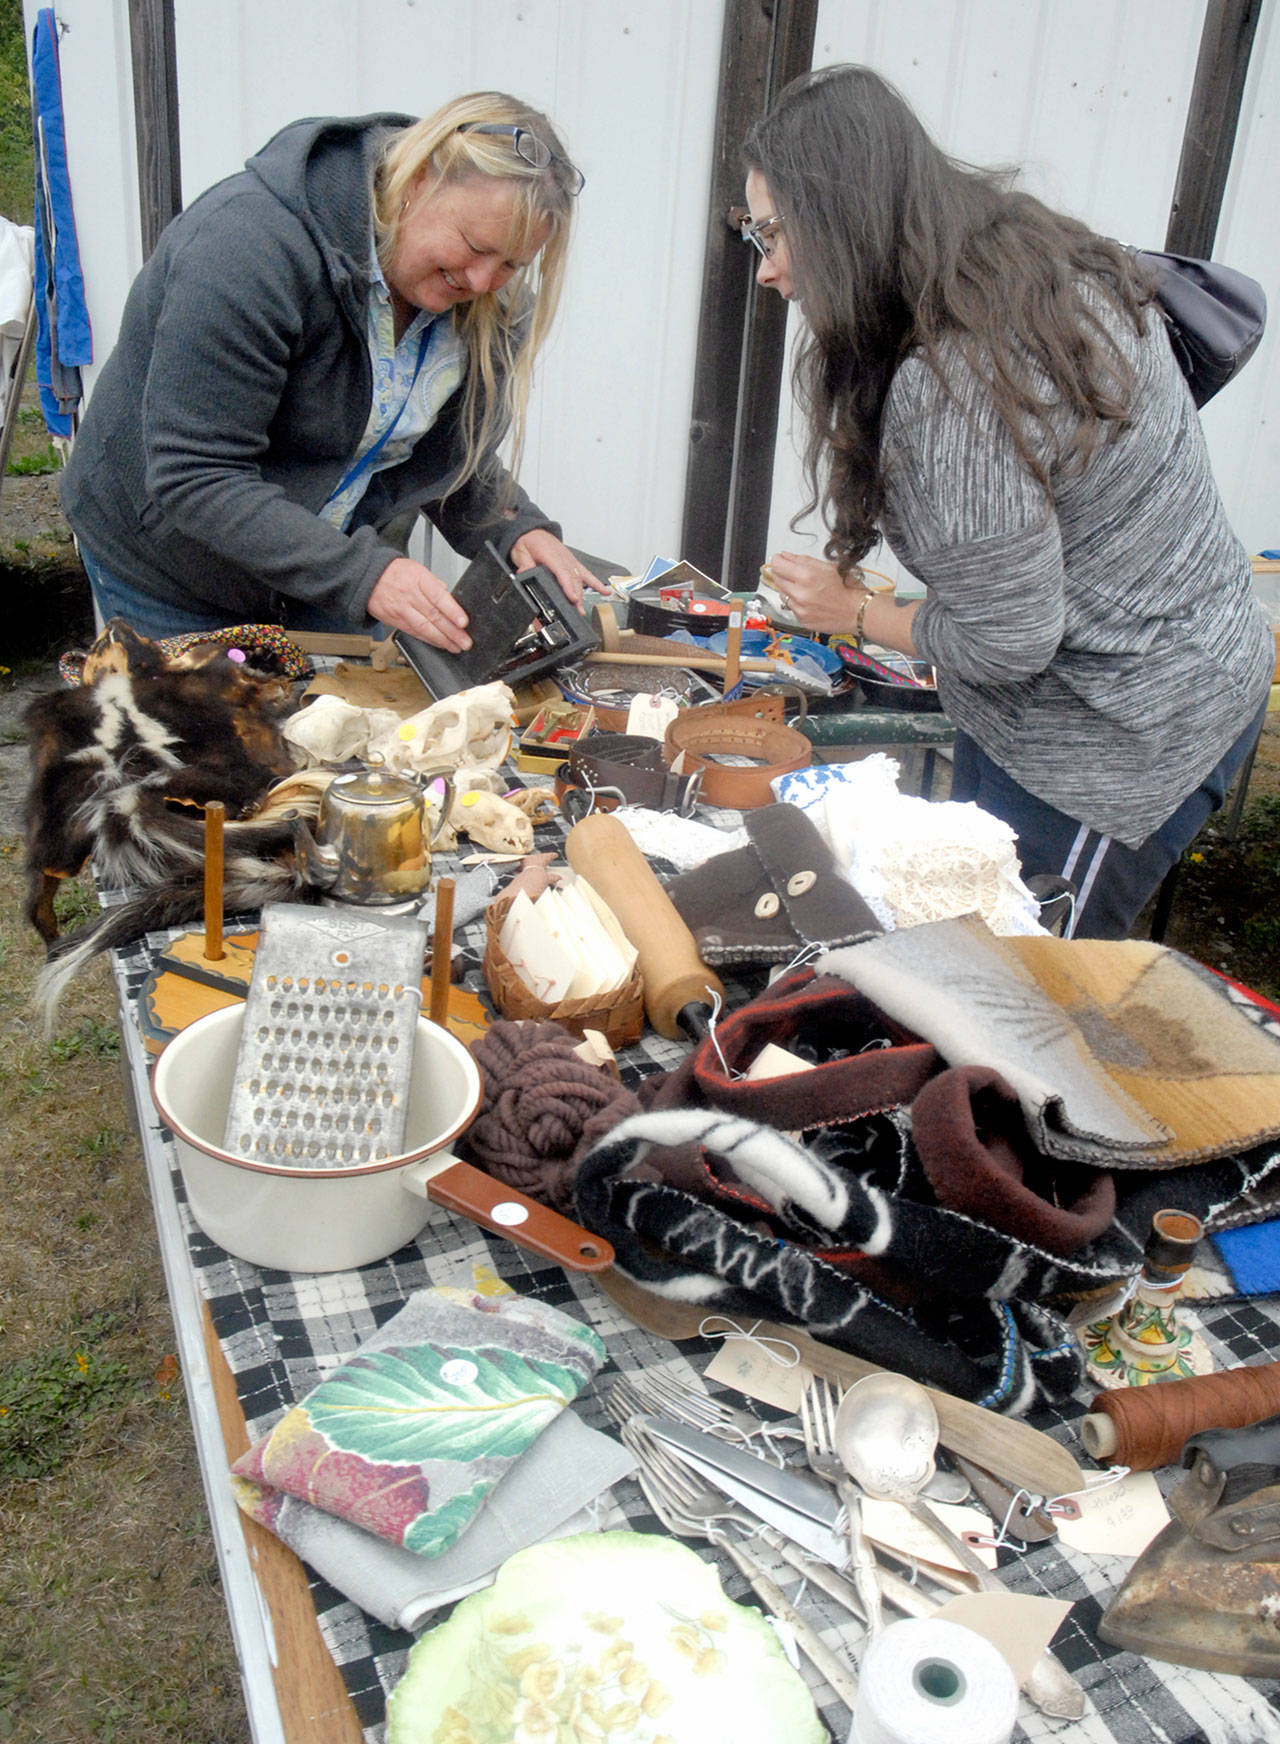 Vendor Lisa Young of Joyce, left, and Colleen Bradley of Sequim look at an antique camera at Young’s table near the Joyce Museum in Joyce as part of last year’s Great Strait Yard Sale. (Keith Thorpe/Peninsula Daily News)